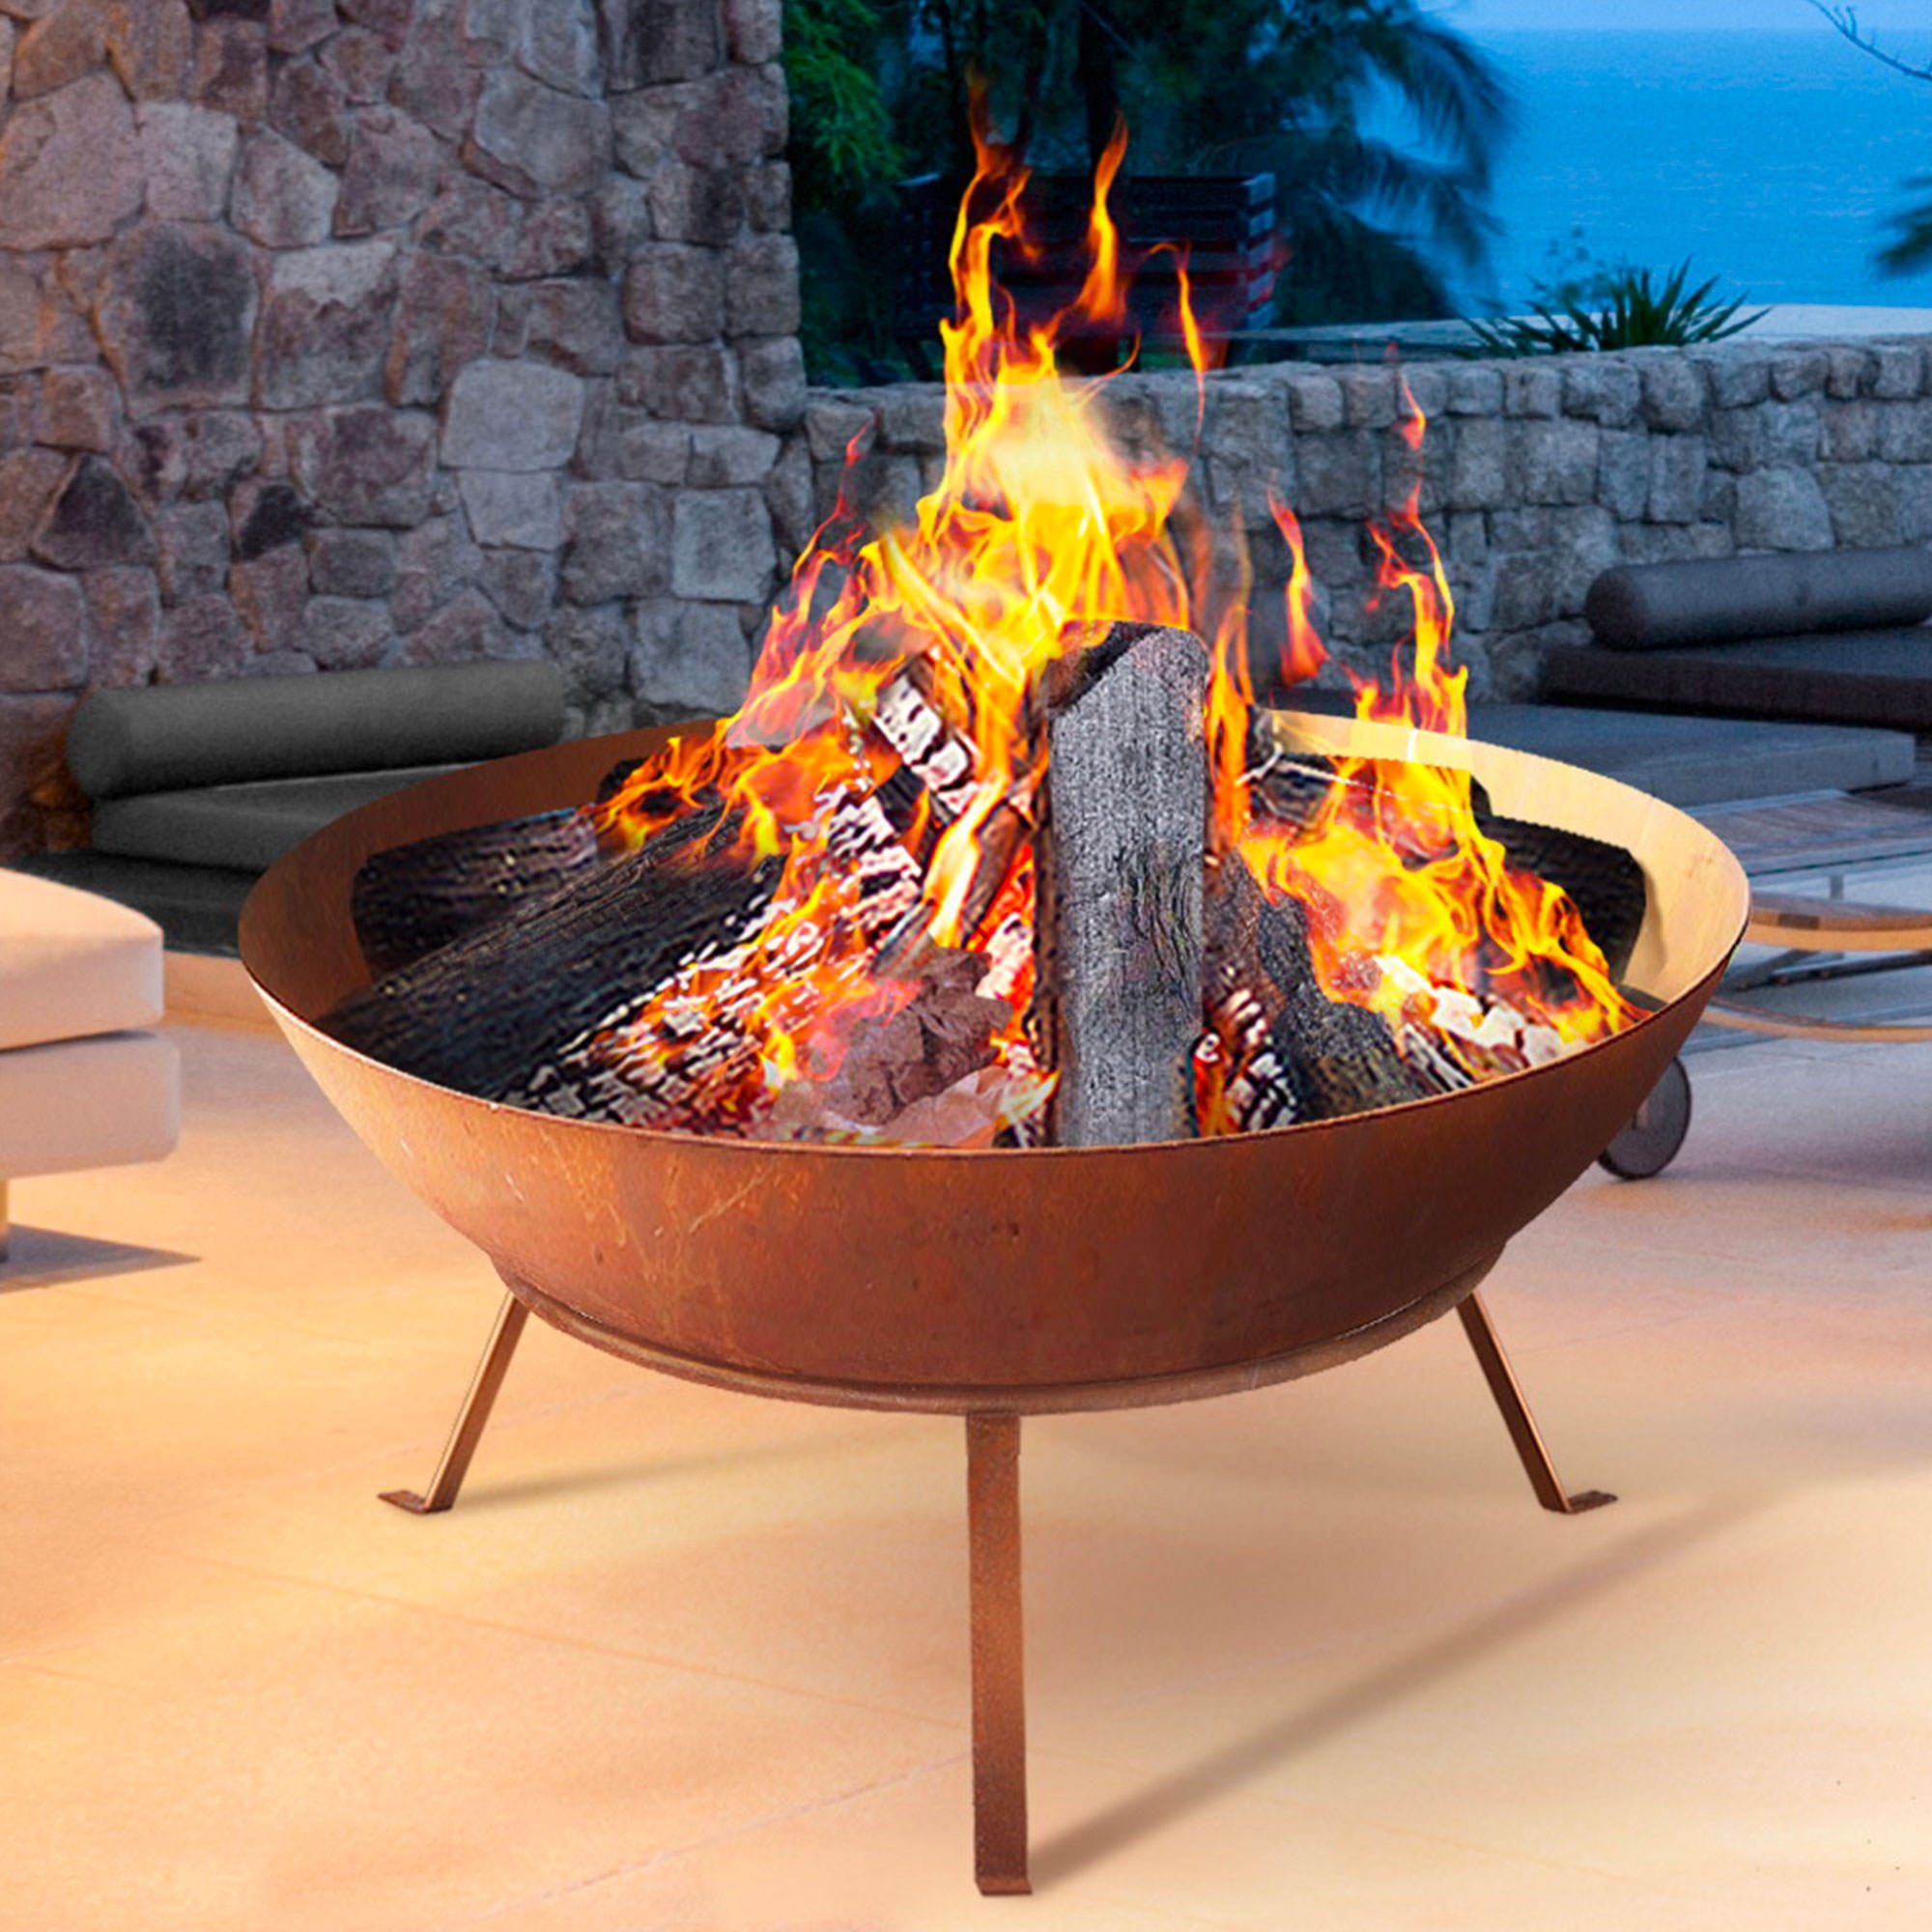 Grillz Outdoor Fire Pit with Built In Stand 70cm Image 2